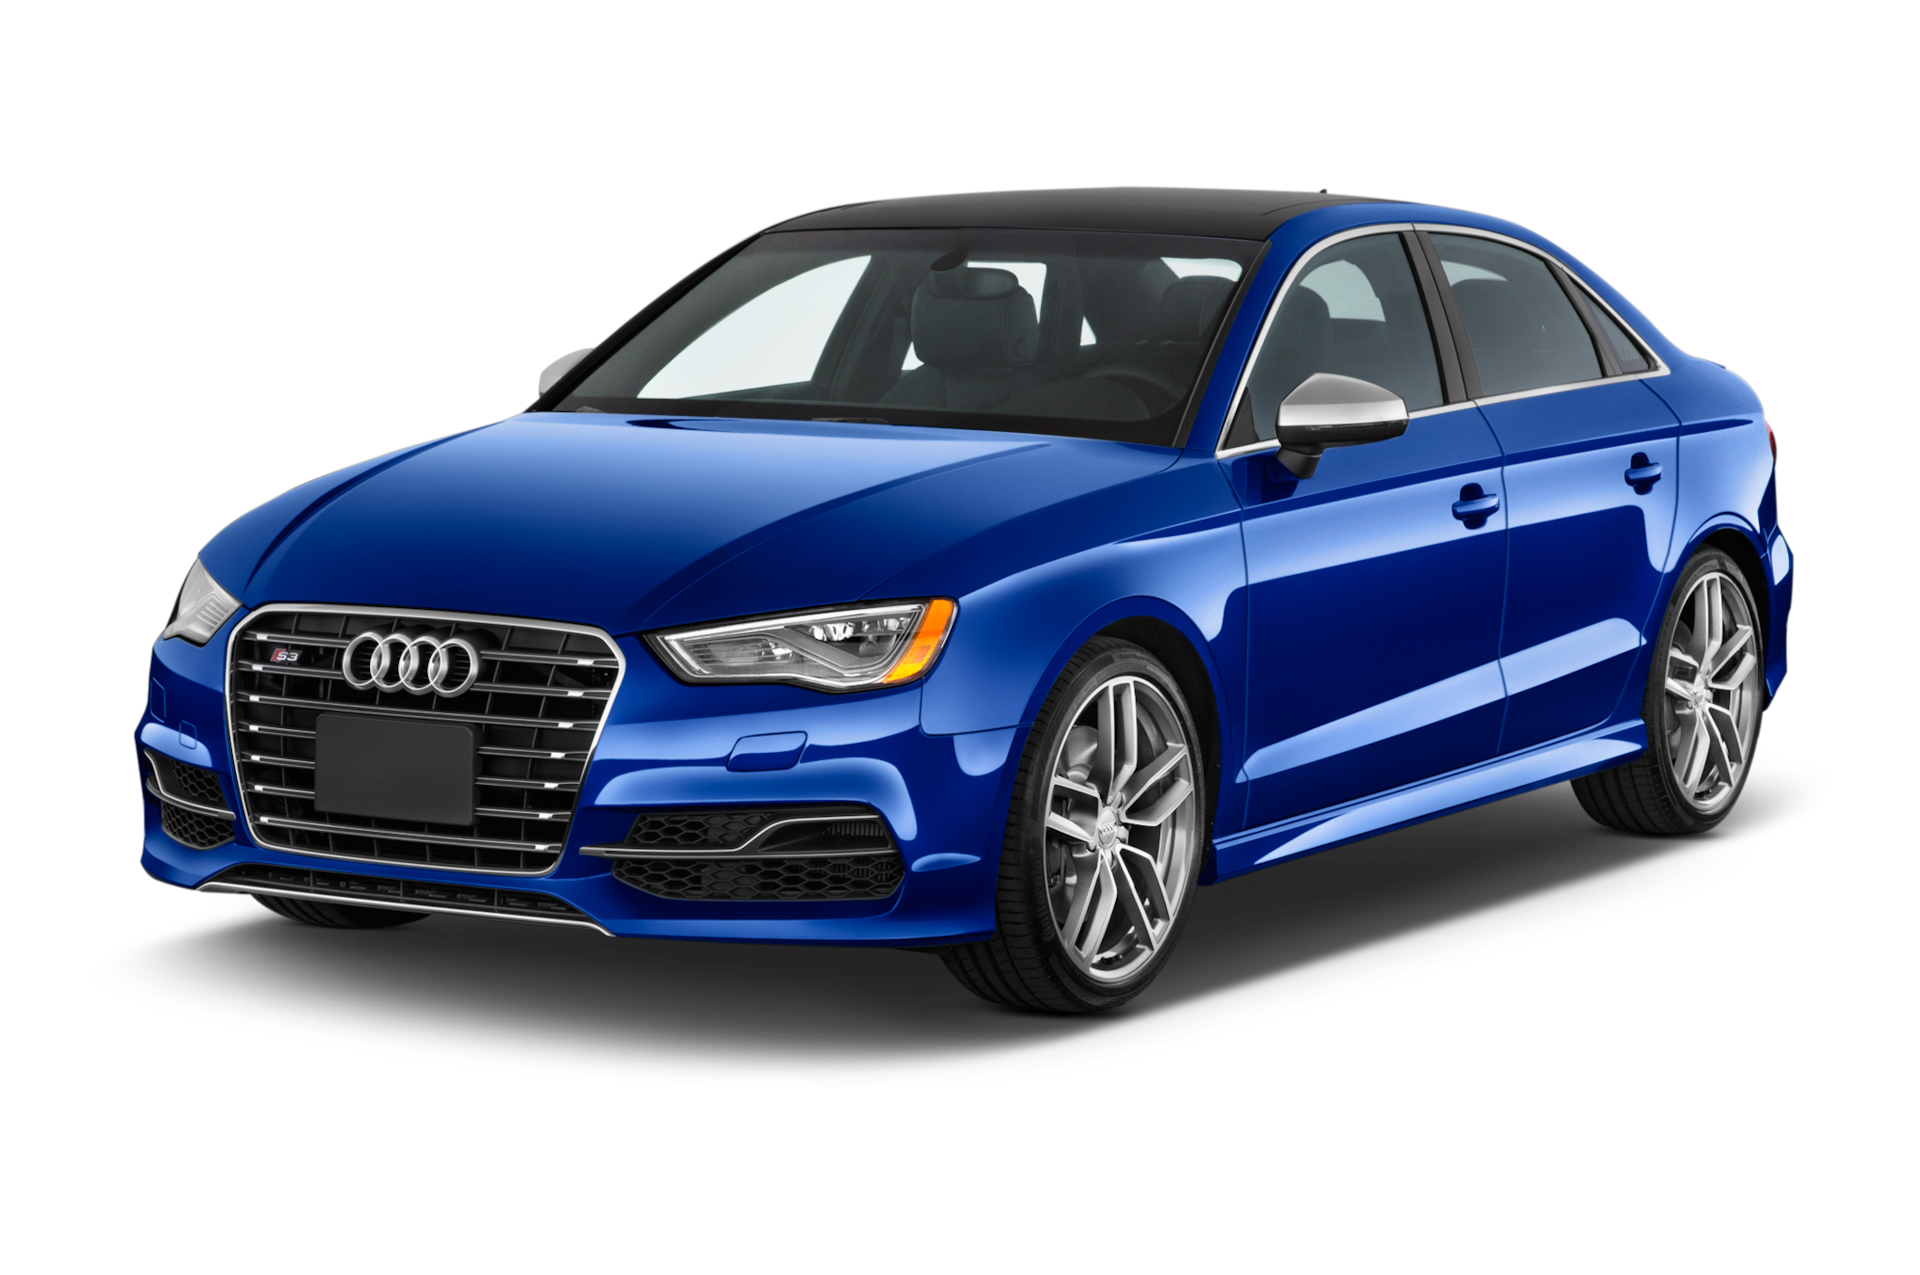 2015 Audi S3 Prices, Reviews, and Photos - MotorTrend